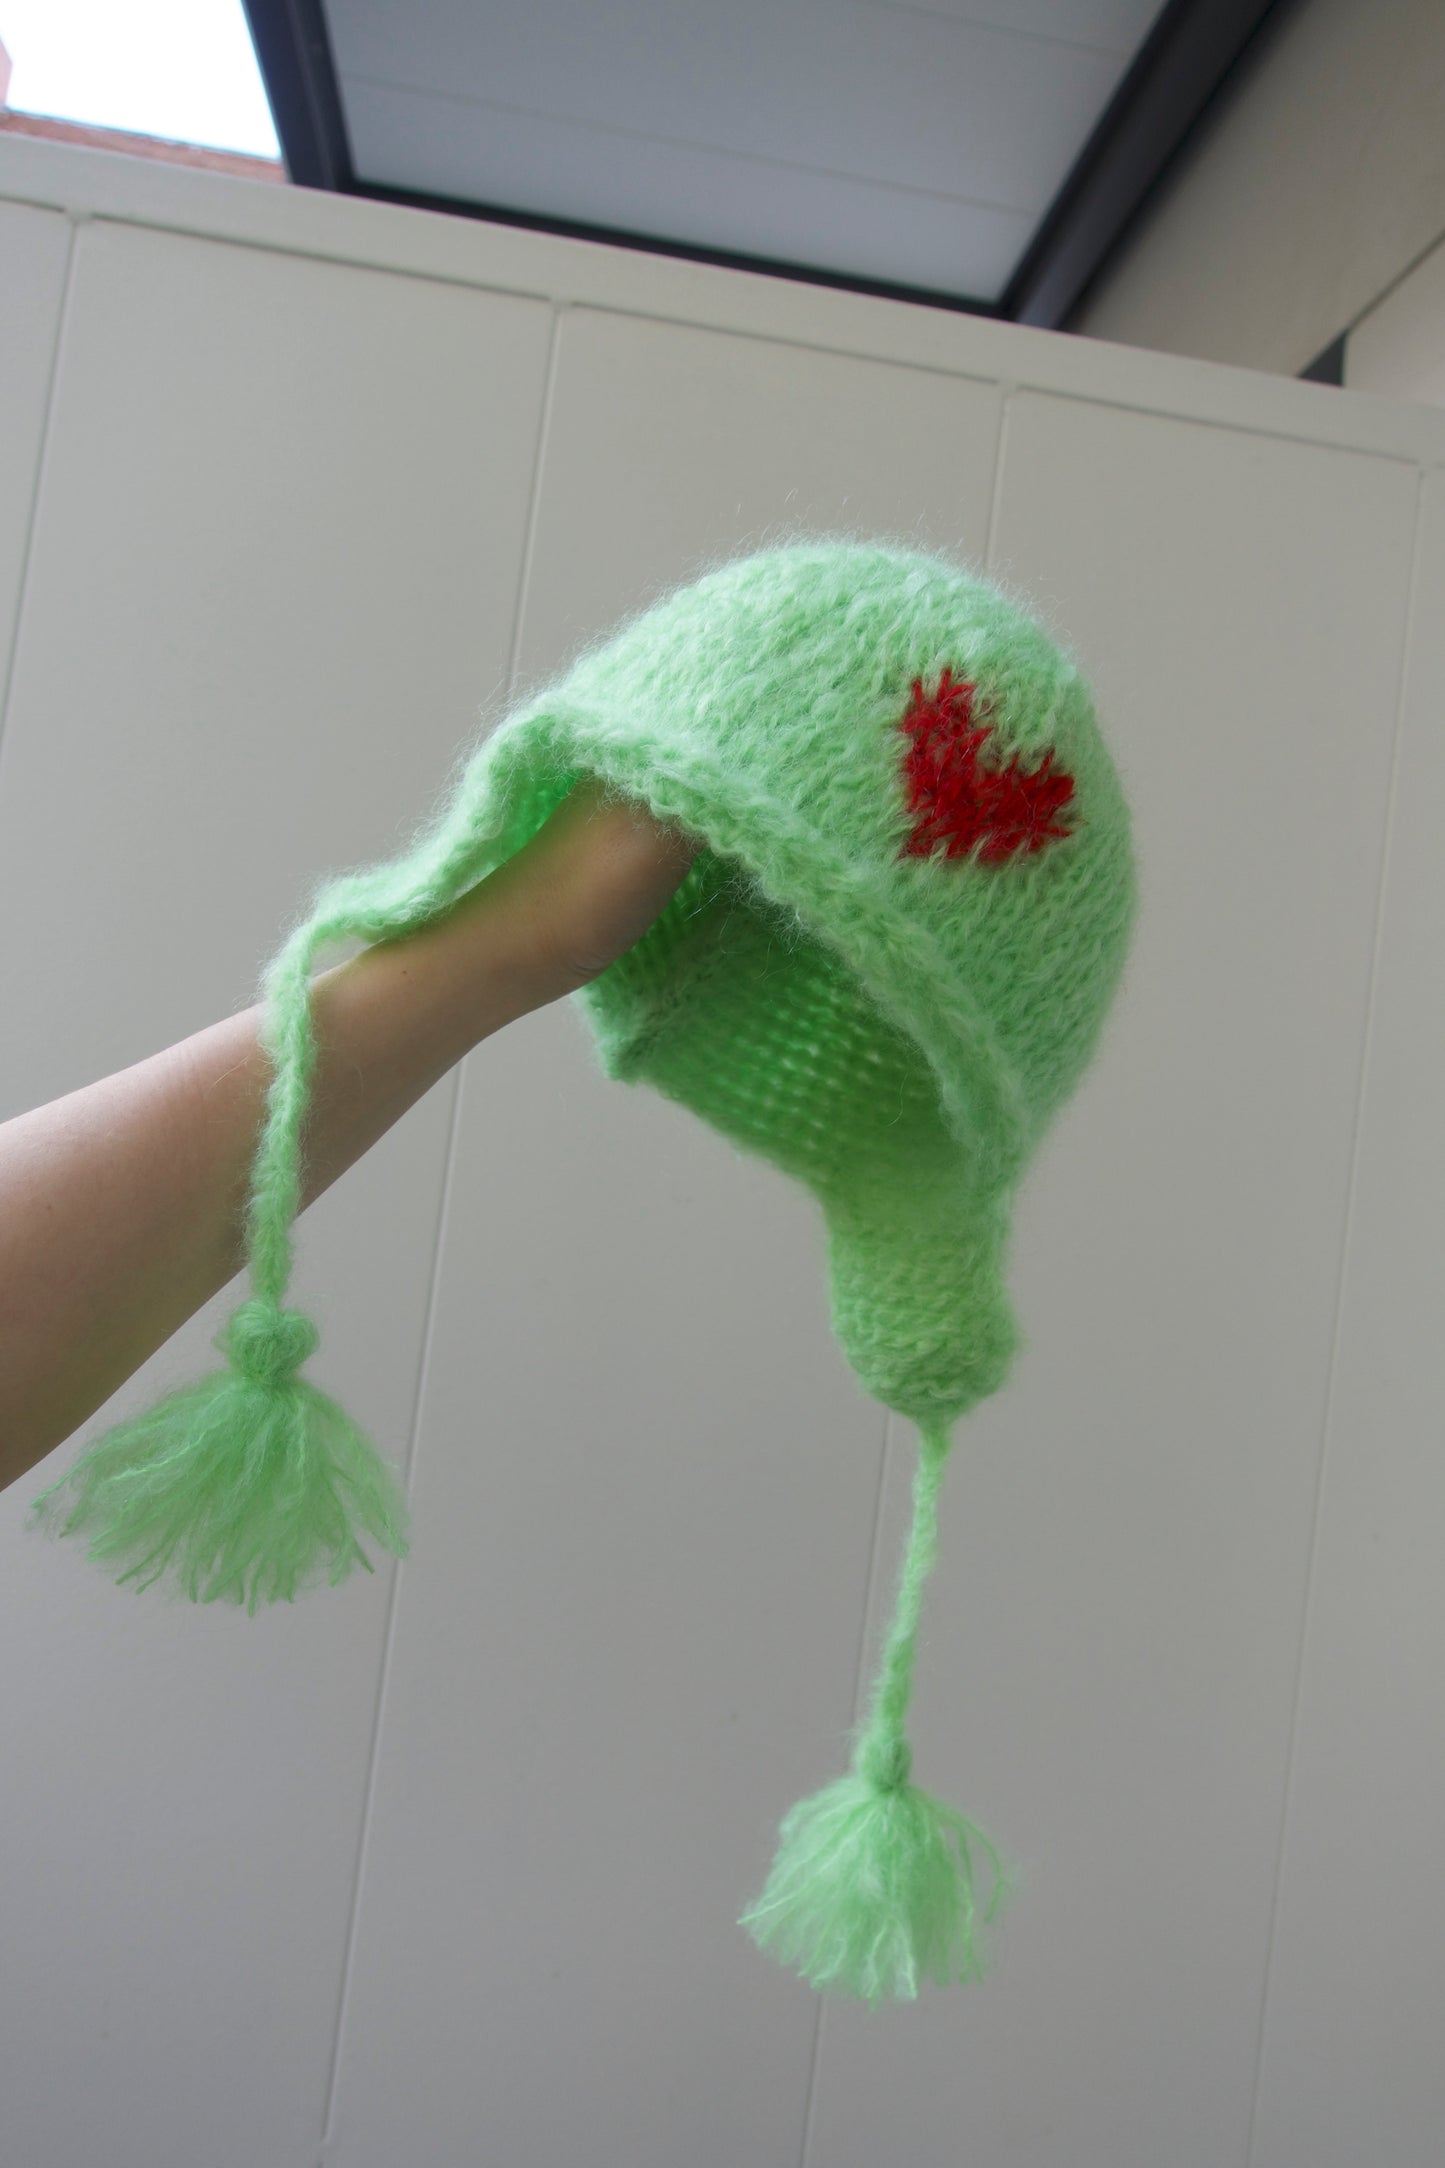 The green "Love" hat with red heart